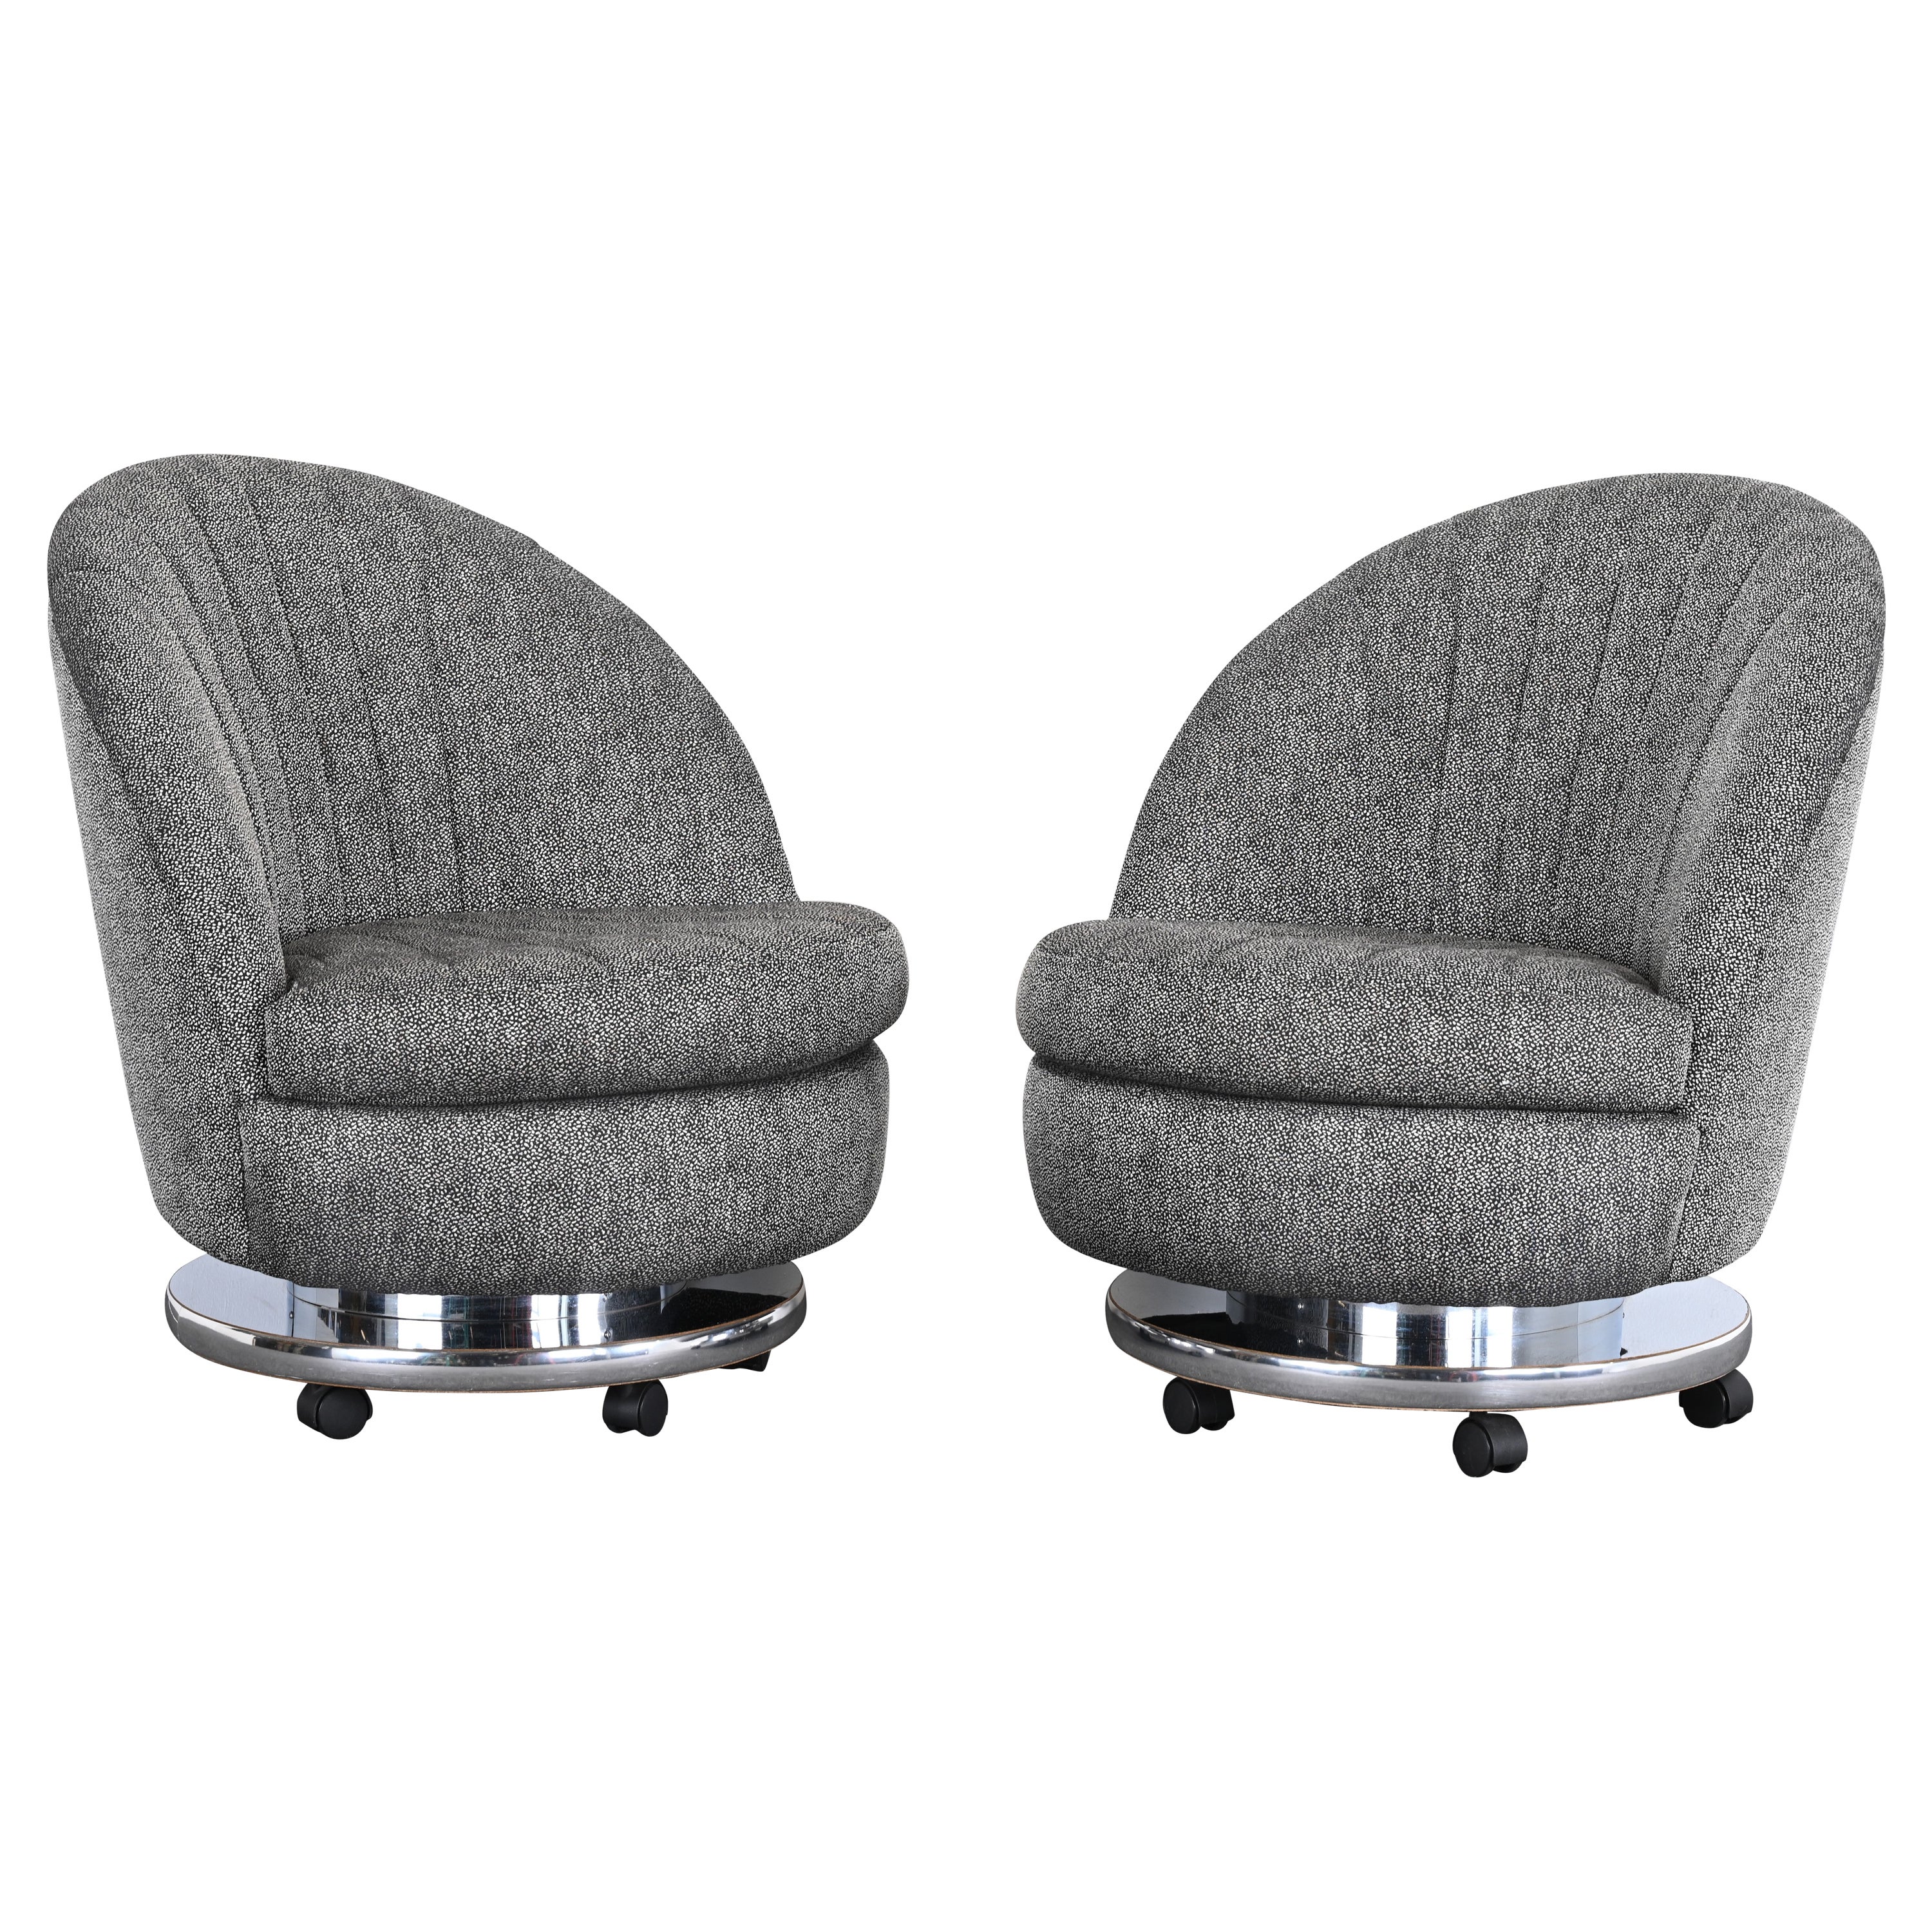 Pair of Milo Baughman Swivel and Tilt Chairs for Thayer Coggin, 1995 For Sale